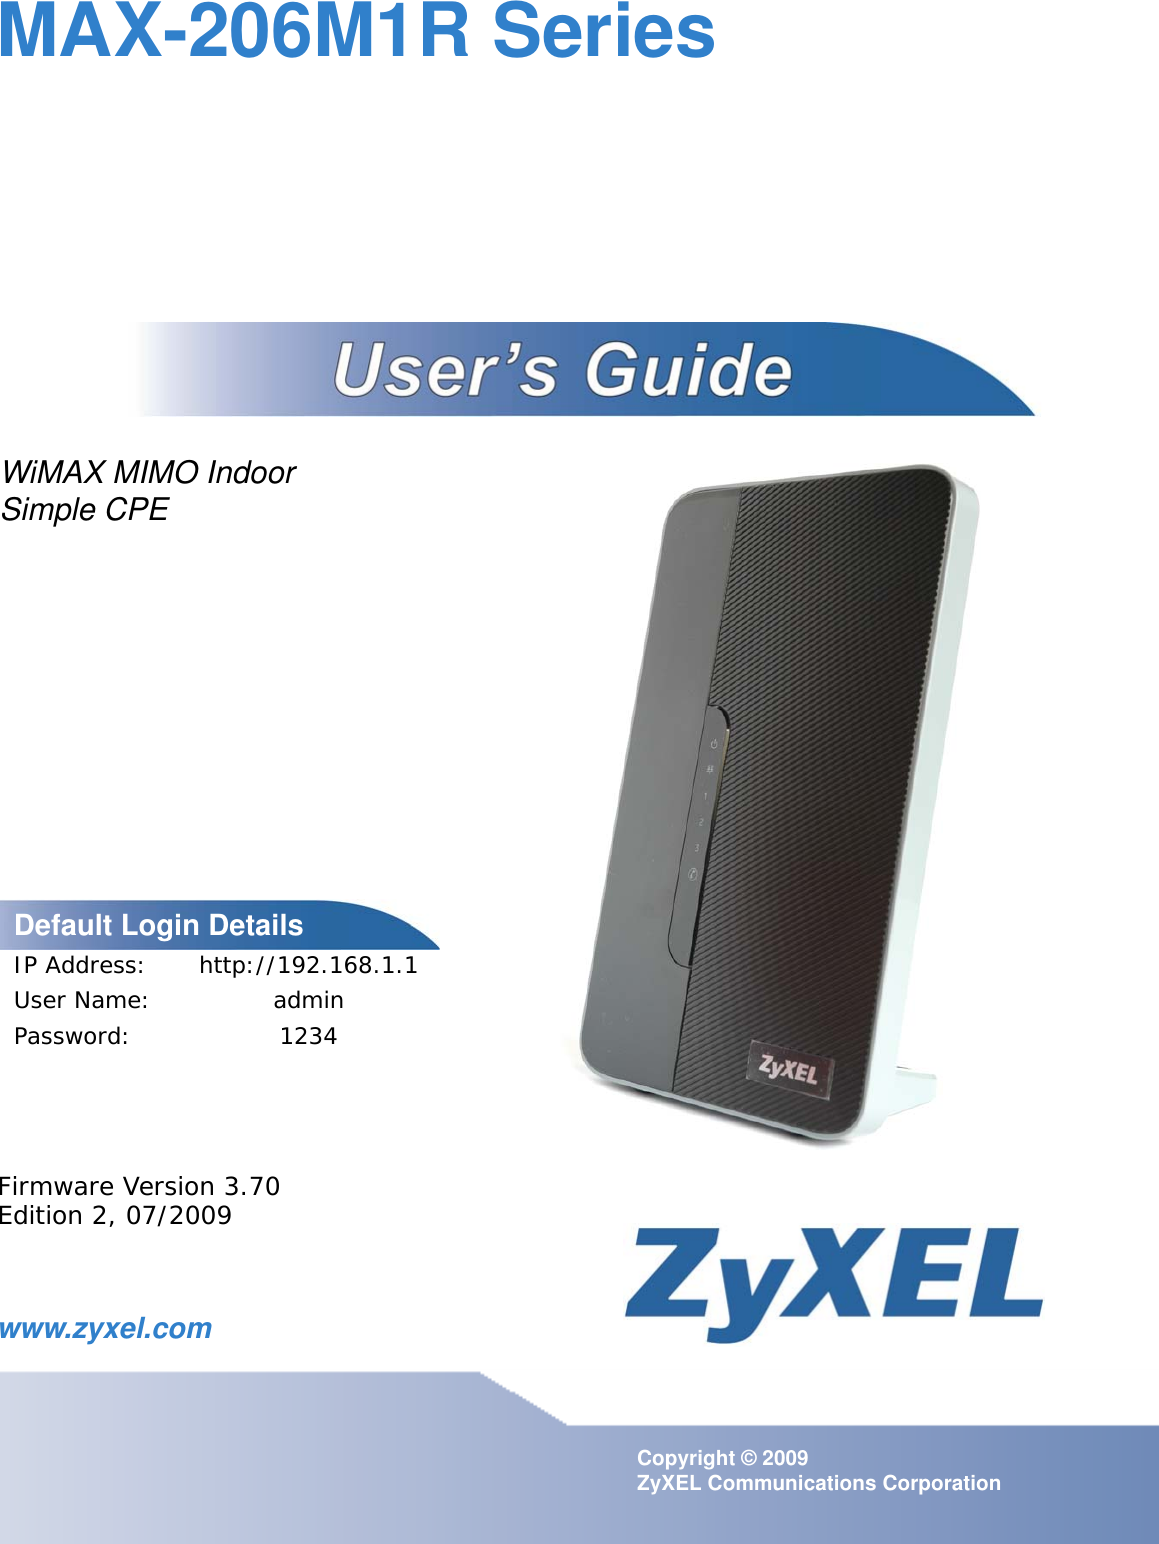 www.zyxel.comwww.zyxel.comMAX-206M1R SeriesCopyright © 2009ZyXEL Communications CorporationFirmware Version 3.70Edition 2, 07/2009Default Login DetailsIP Address: http://192.168.1.1User Name: adminPassword: 1234WiMAX MIMO Indoor Simple CPE